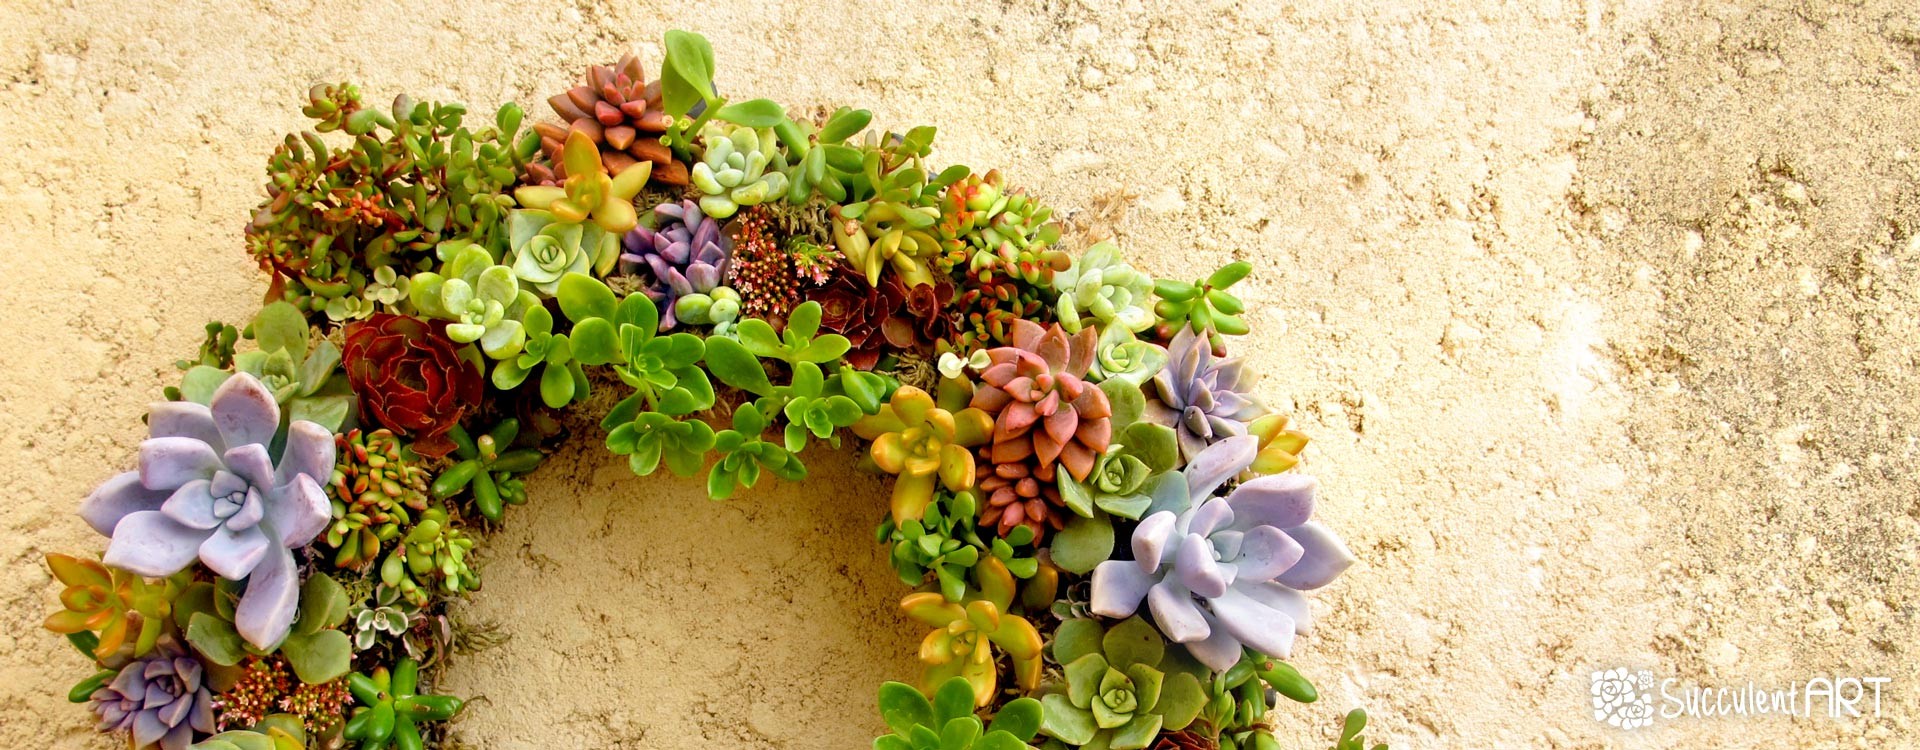 How to make a Succulent Wreath